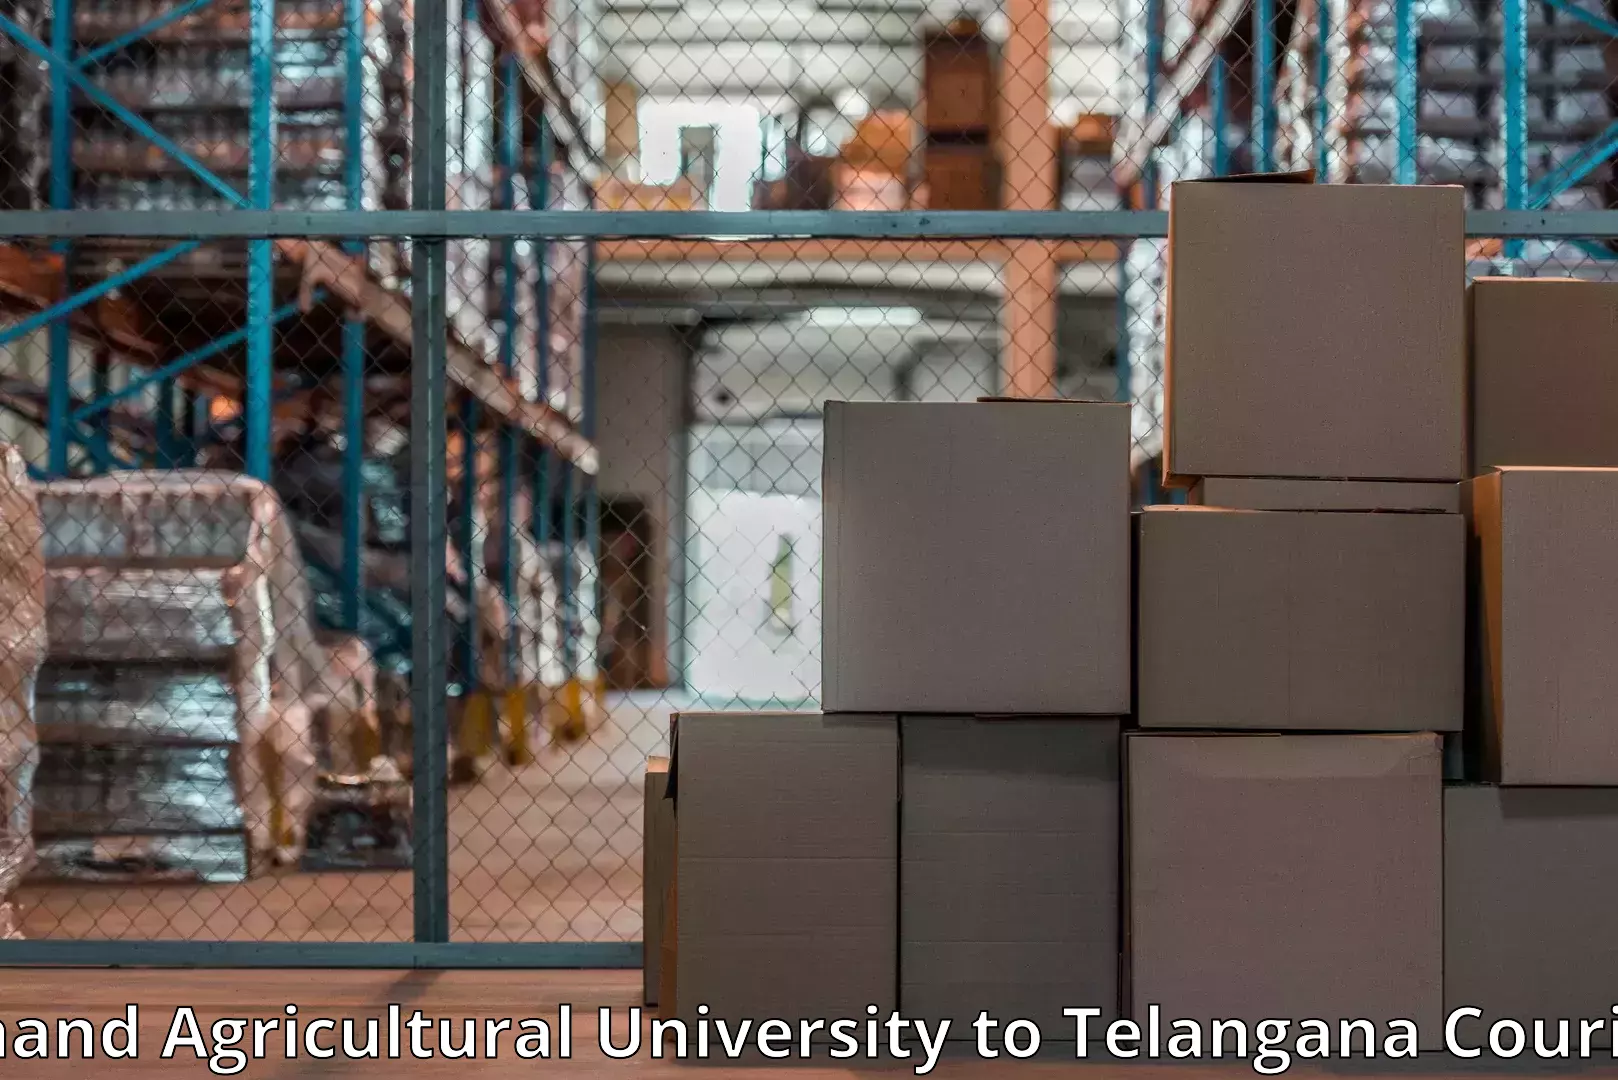 Quality relocation services Anand Agricultural University to Kamalapur